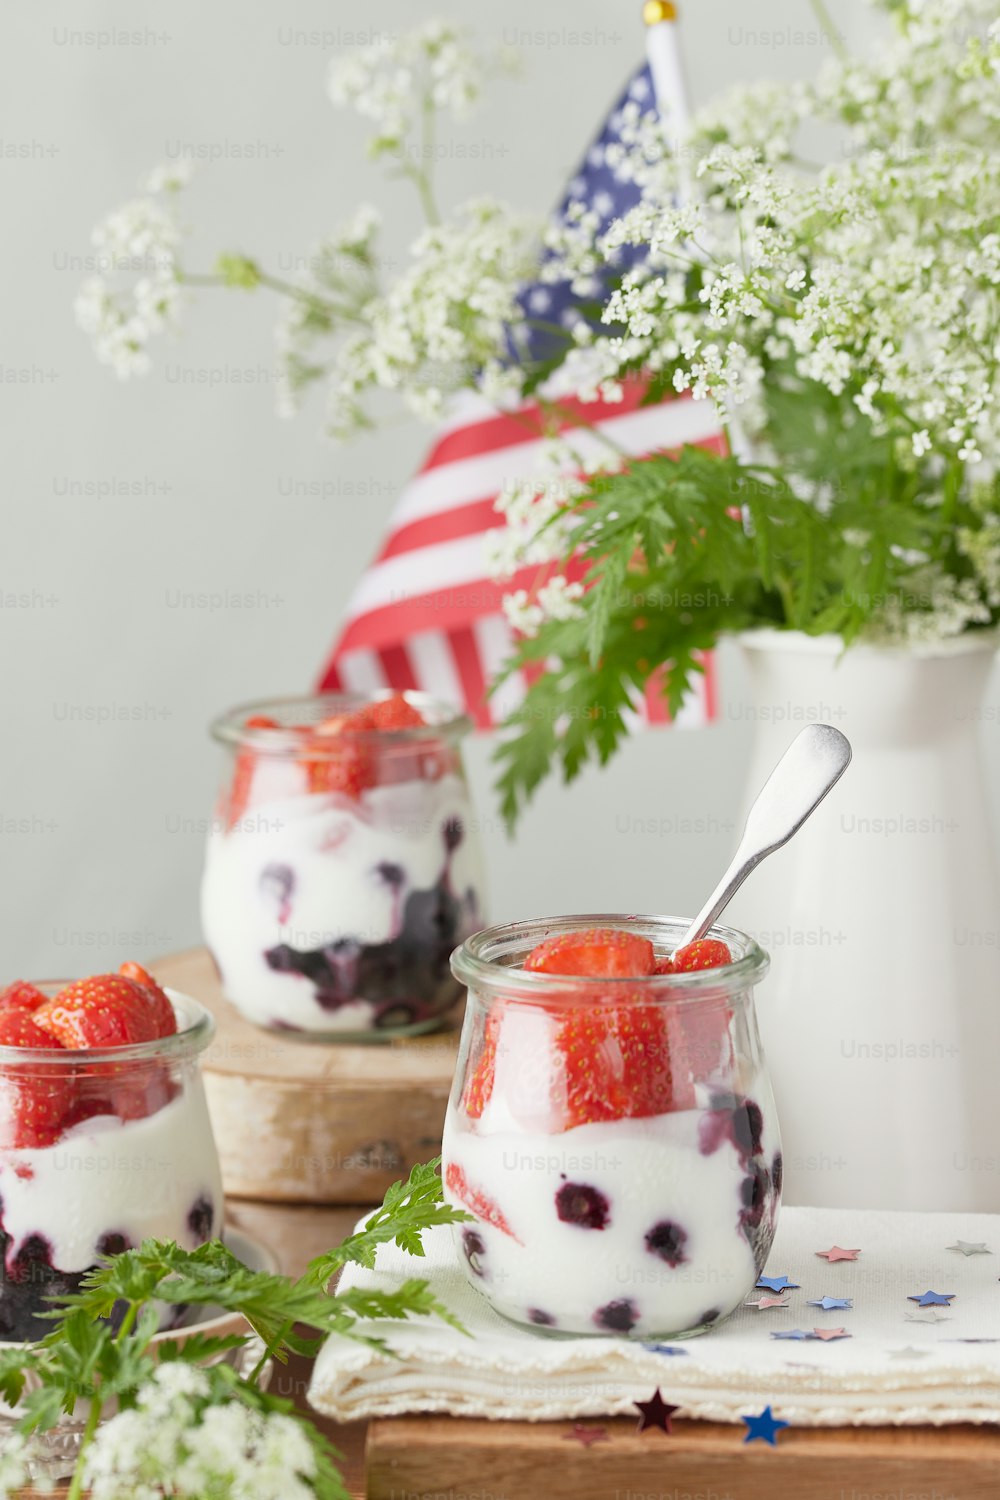 two jars of yogurt with strawberries and berries in them